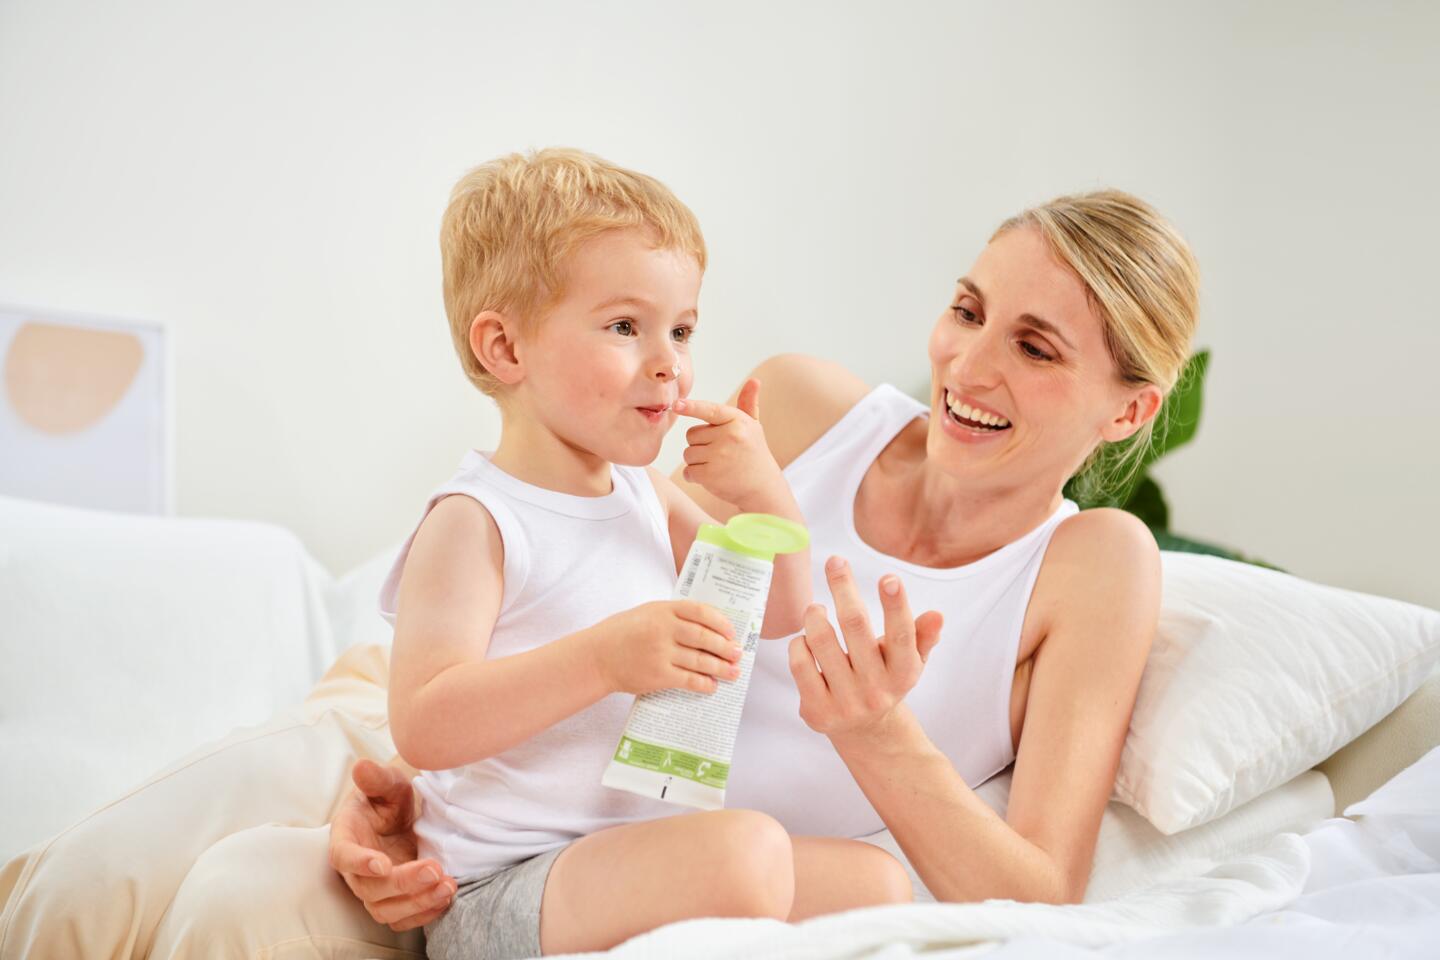 AD_EXOMEGA_EMOLLIENT_CREAM_BOY AND MOTHER BED3_LIFESTYLE_200ML_2022